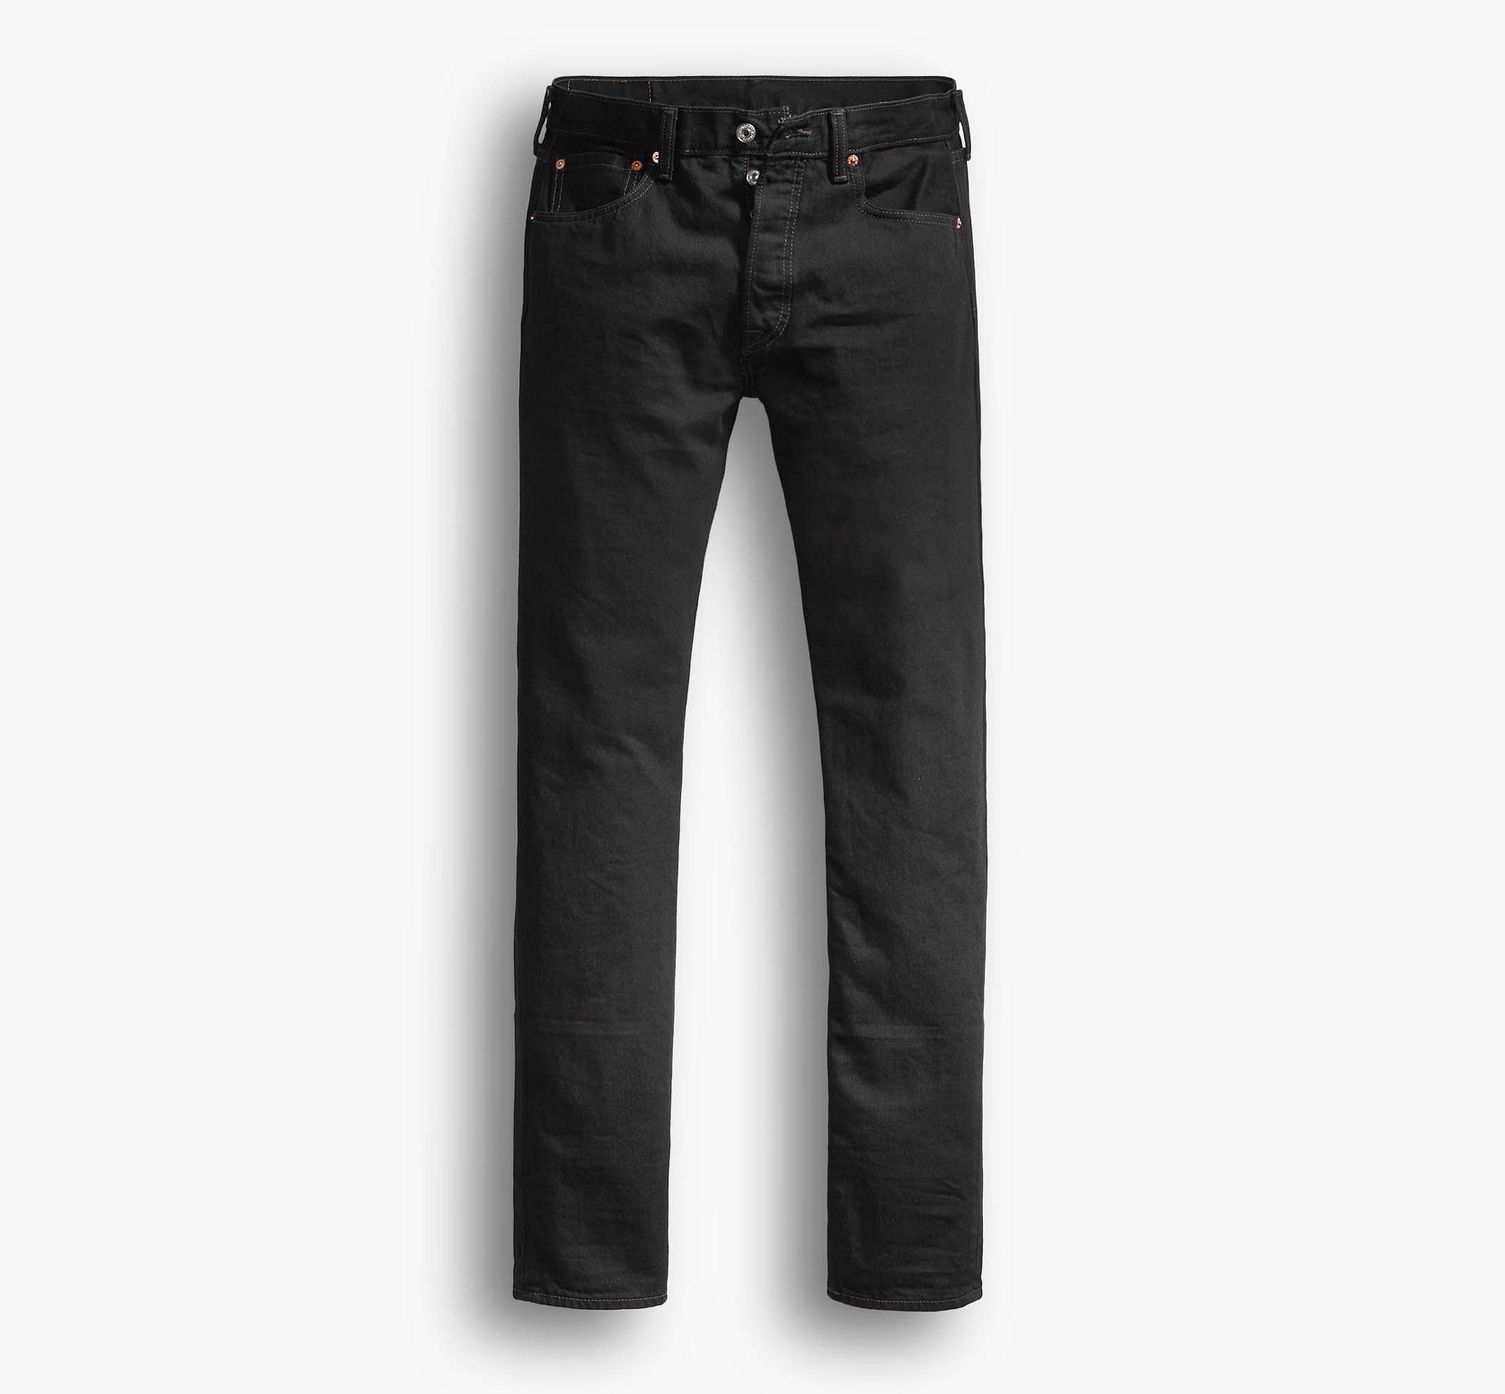 Top 5 Best Black Dye for Jeans Reviews in 2023 - Most Popular Collections 